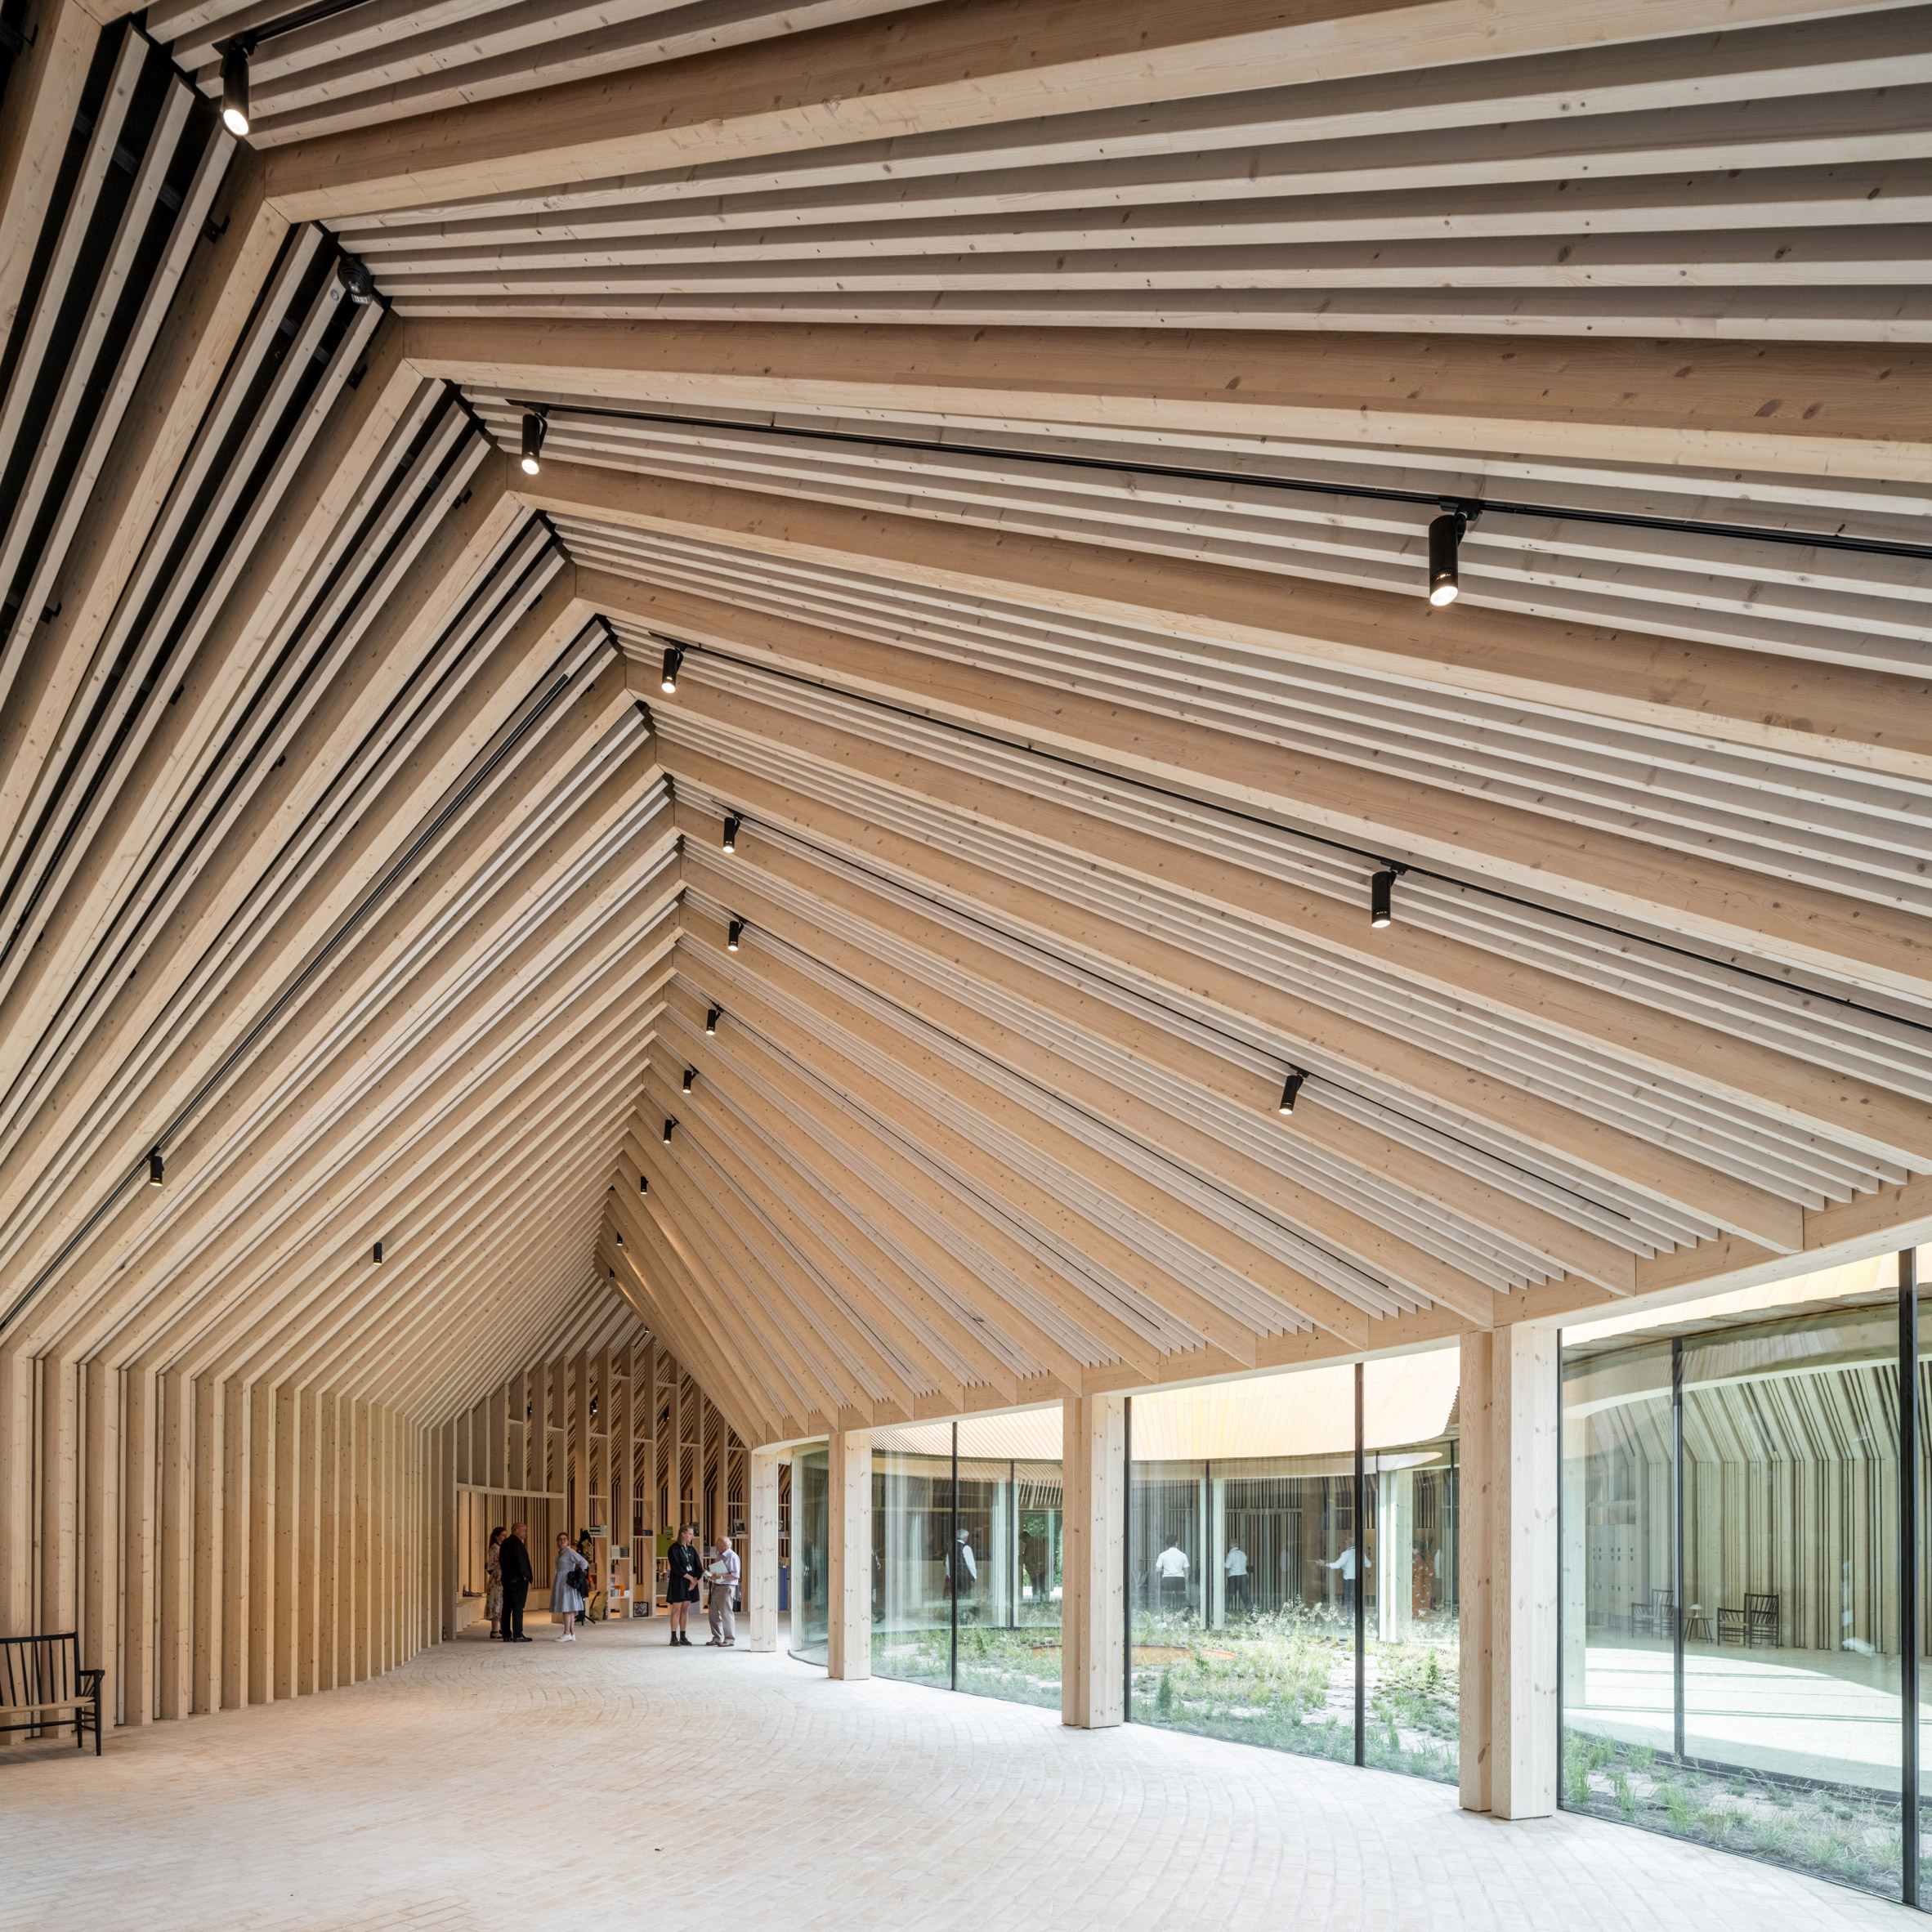 Interior of timber extension building at Refugee Museum of Denmark